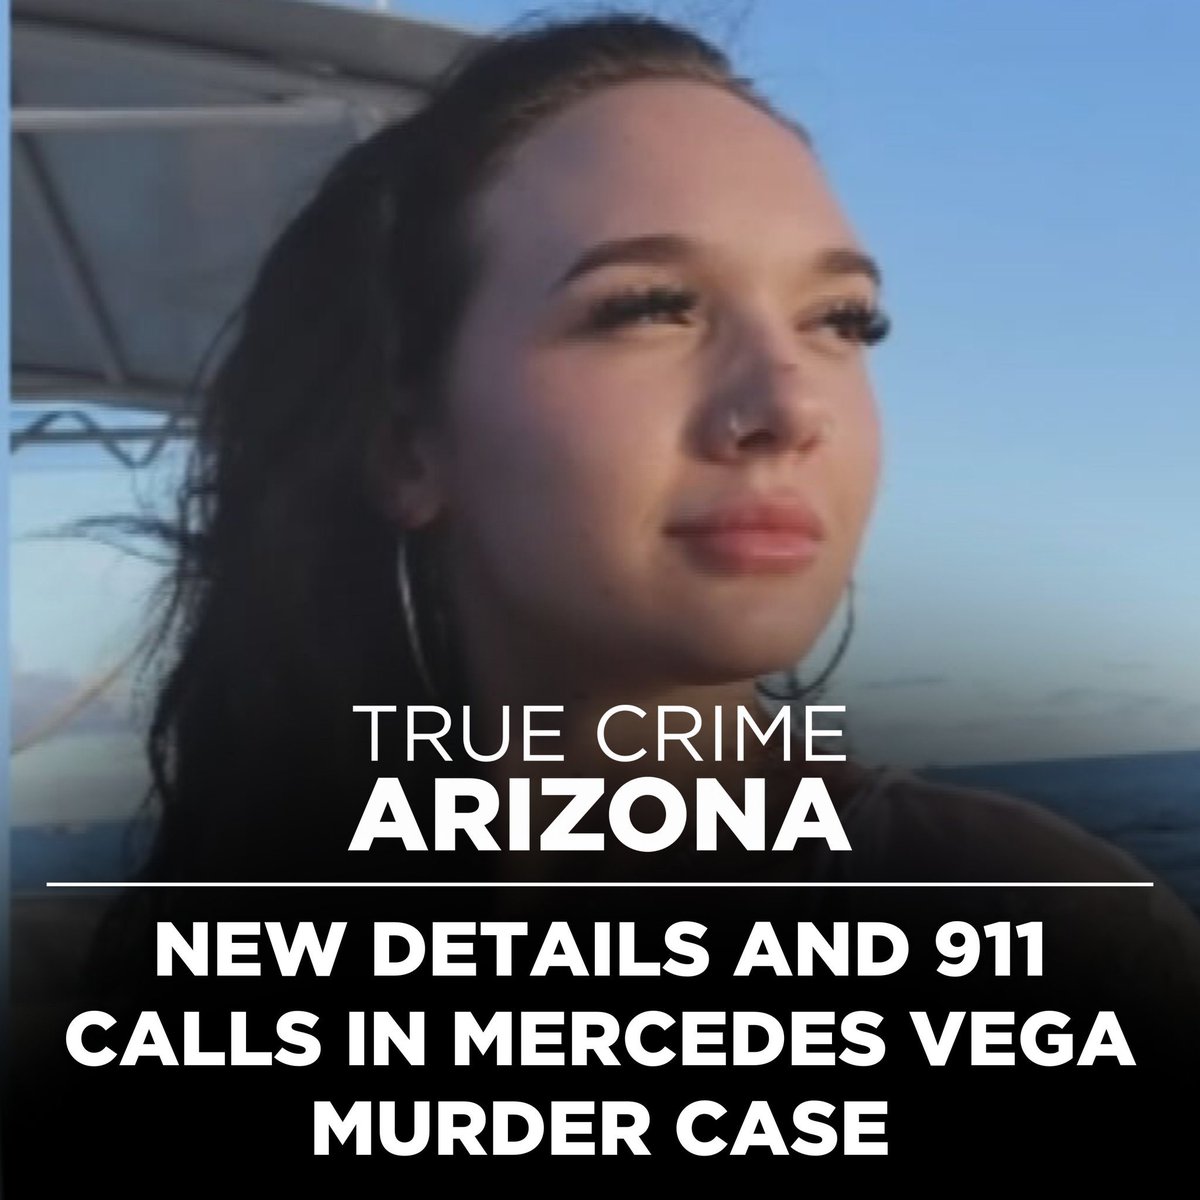 🚨NEW PODCAST🚨 We learn details from the day Mercedes Vega’s body was found burning in a car, and the 911 calls made from the freeway. Her parents discuss the new details in her unsolved murder and spreading her ashes in Hawaii… Apple: apple.co/3QUgQAR Spotify: